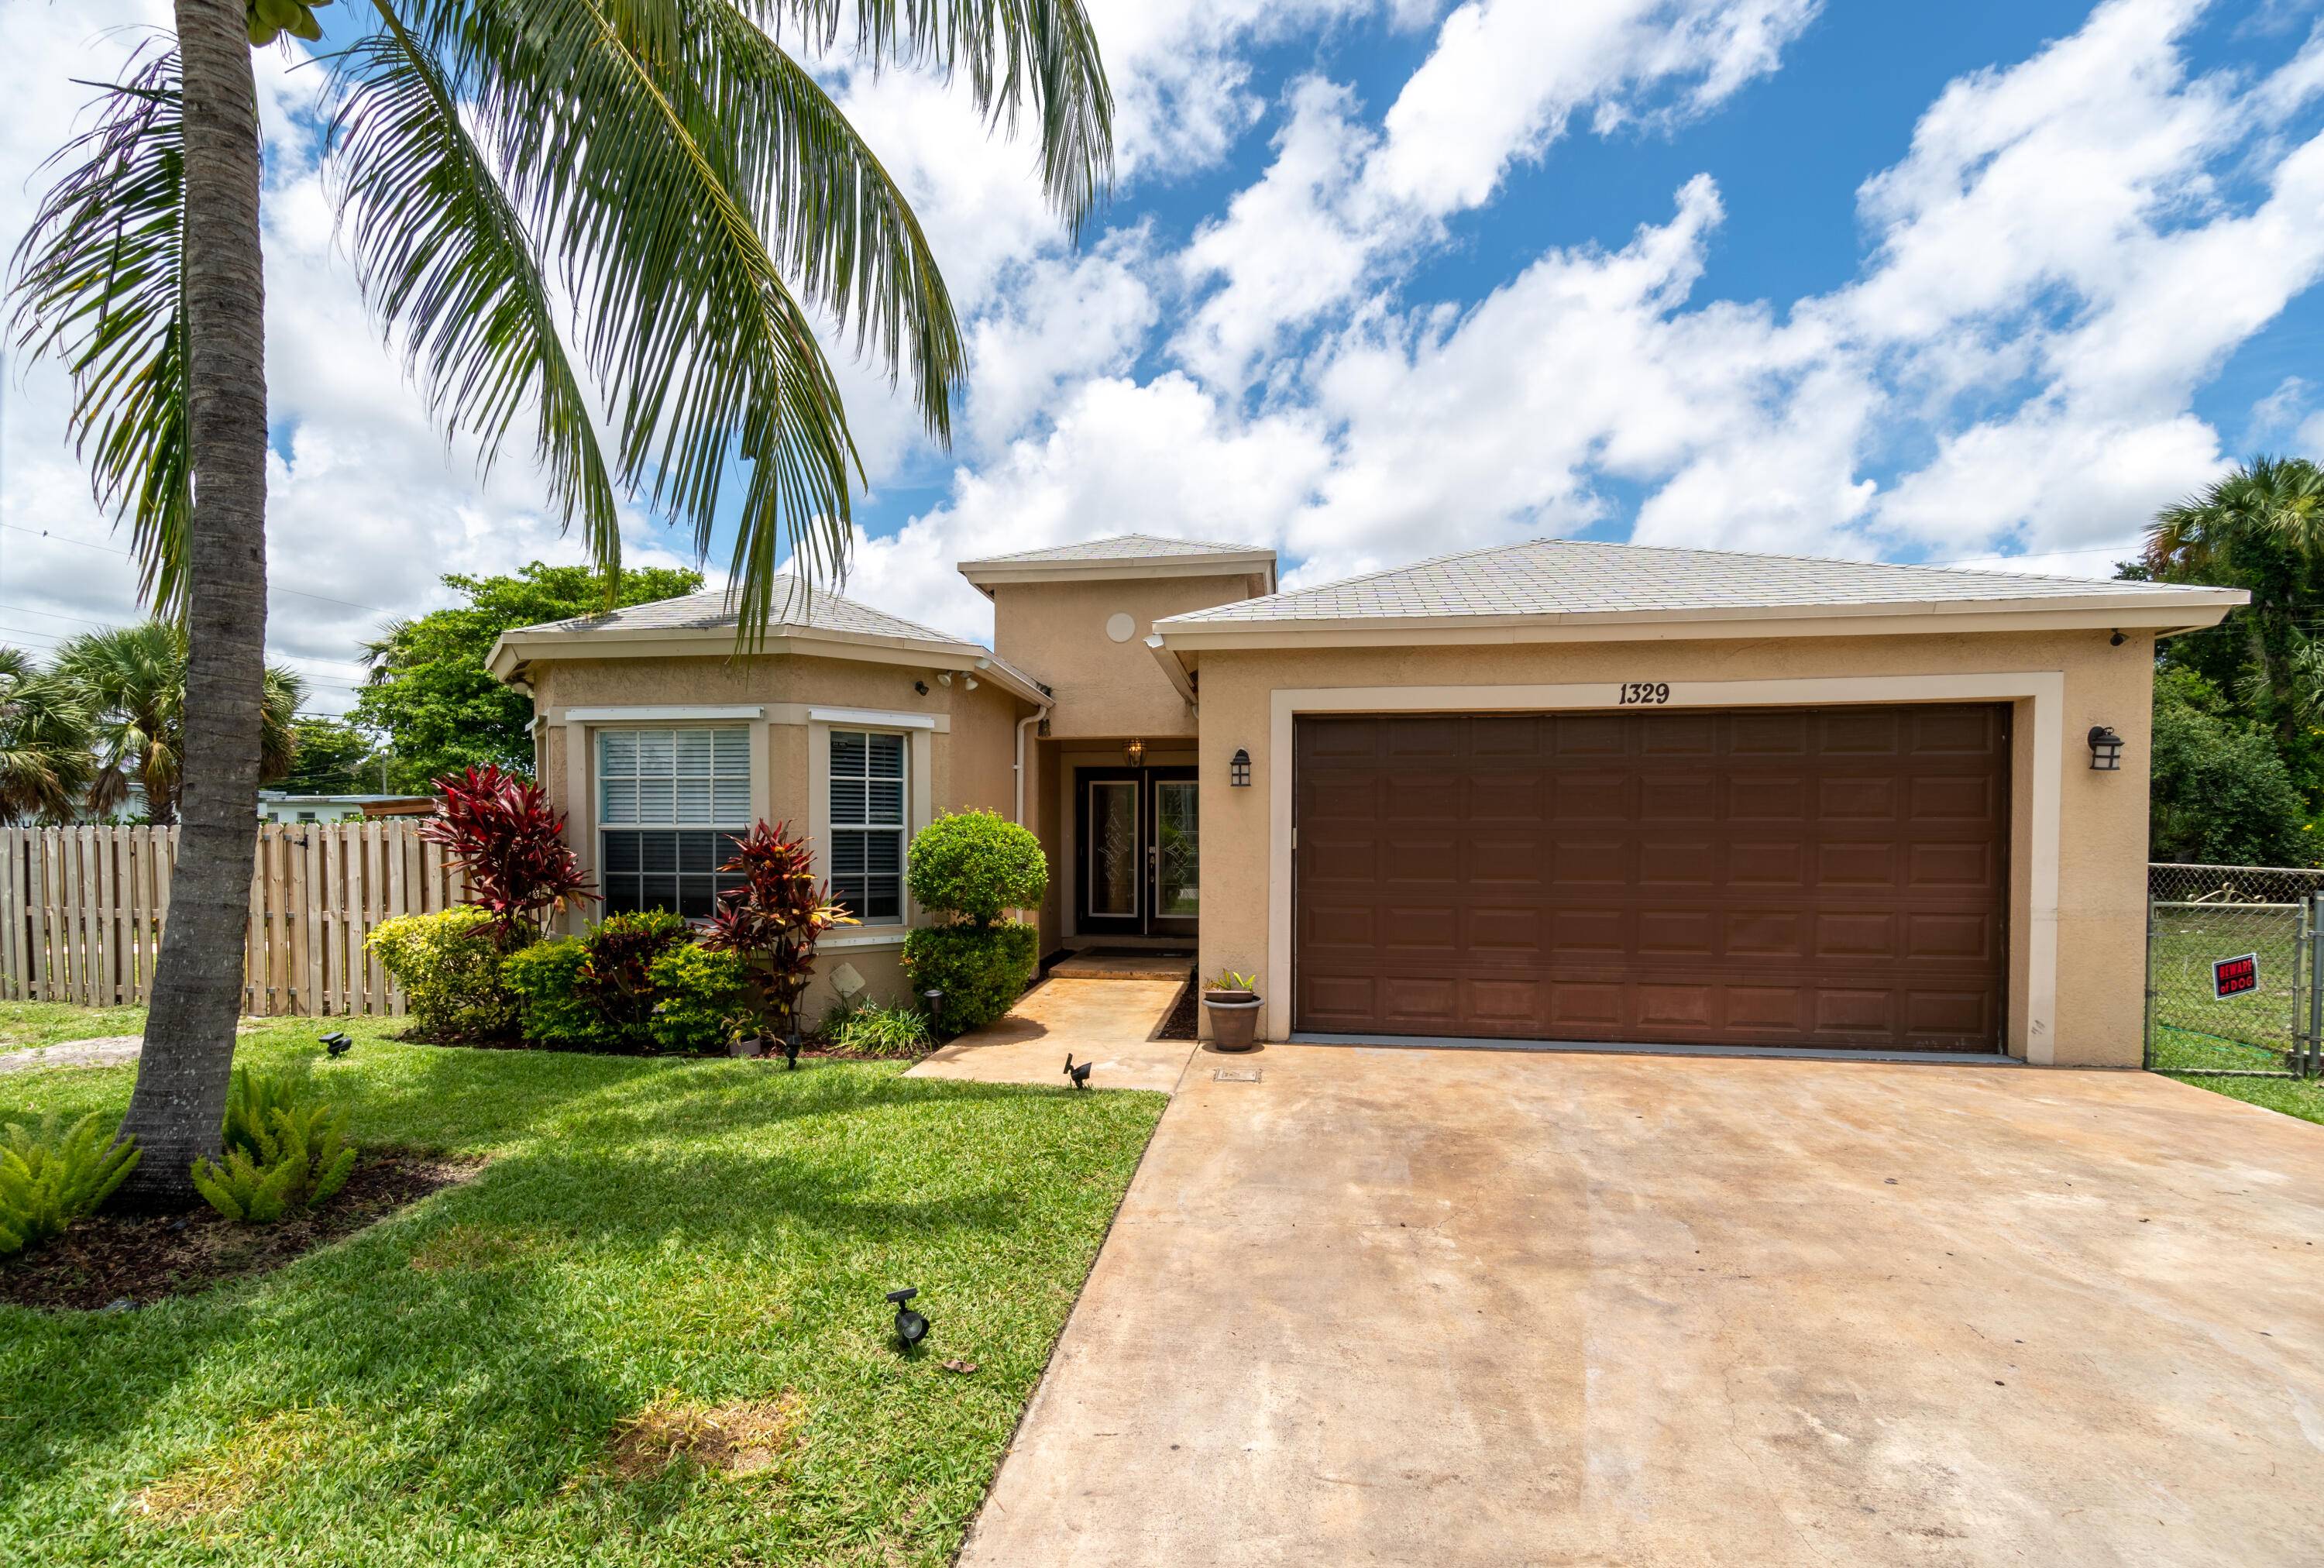 East Fort Lauderdale location Huge Corner Double Lot is currently run as an airbnb 3 Bd 2 Bth open floor plan with a huge backyard and Magnificent pool.